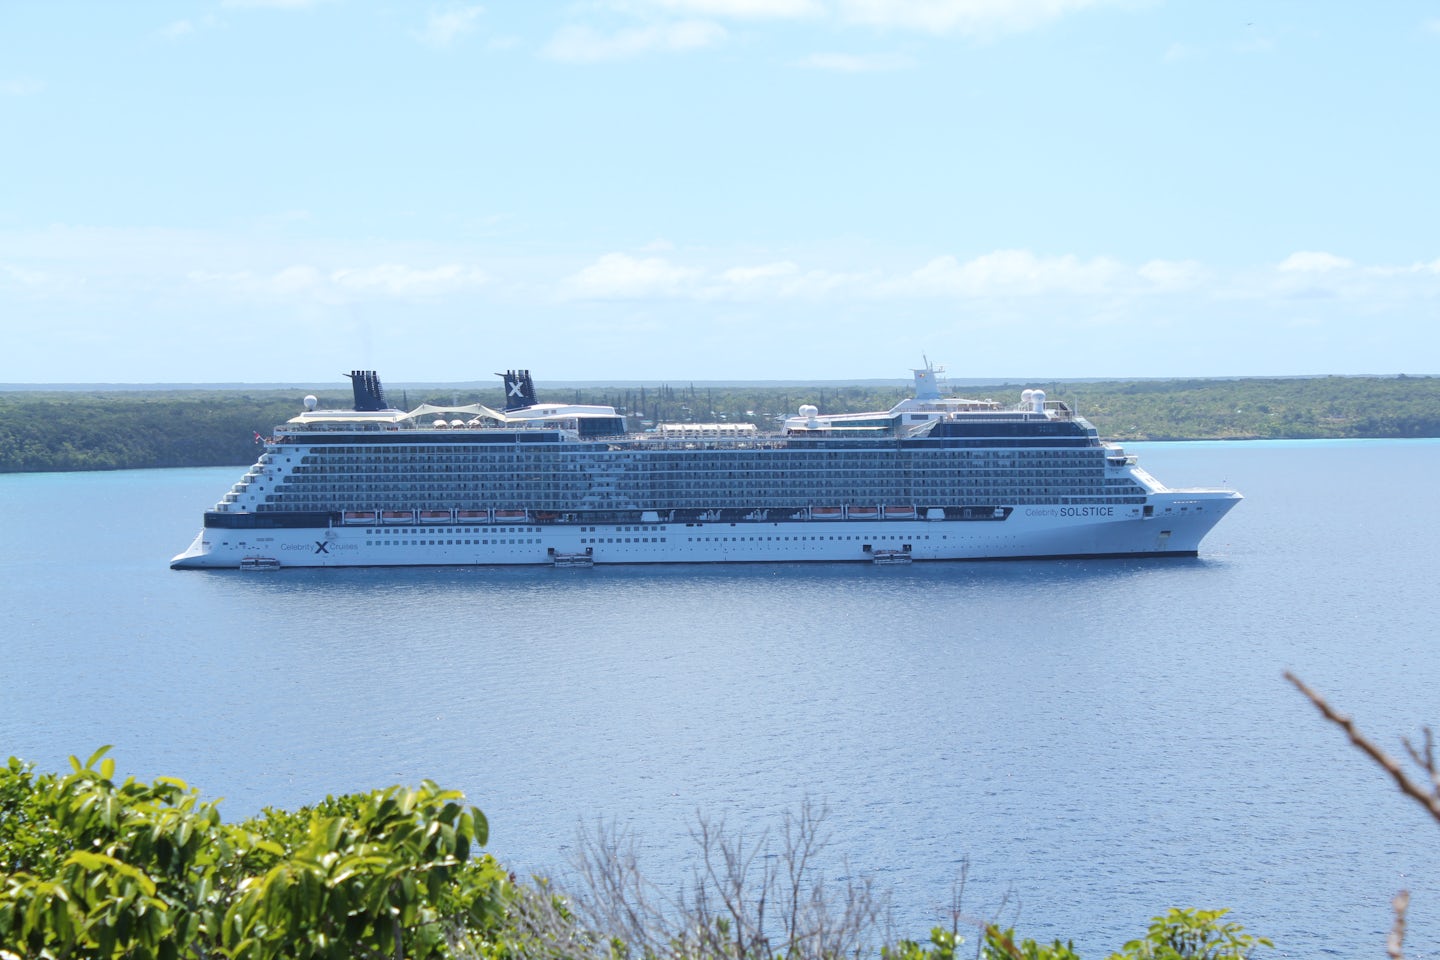 The Solstice at anchor in Lifou.